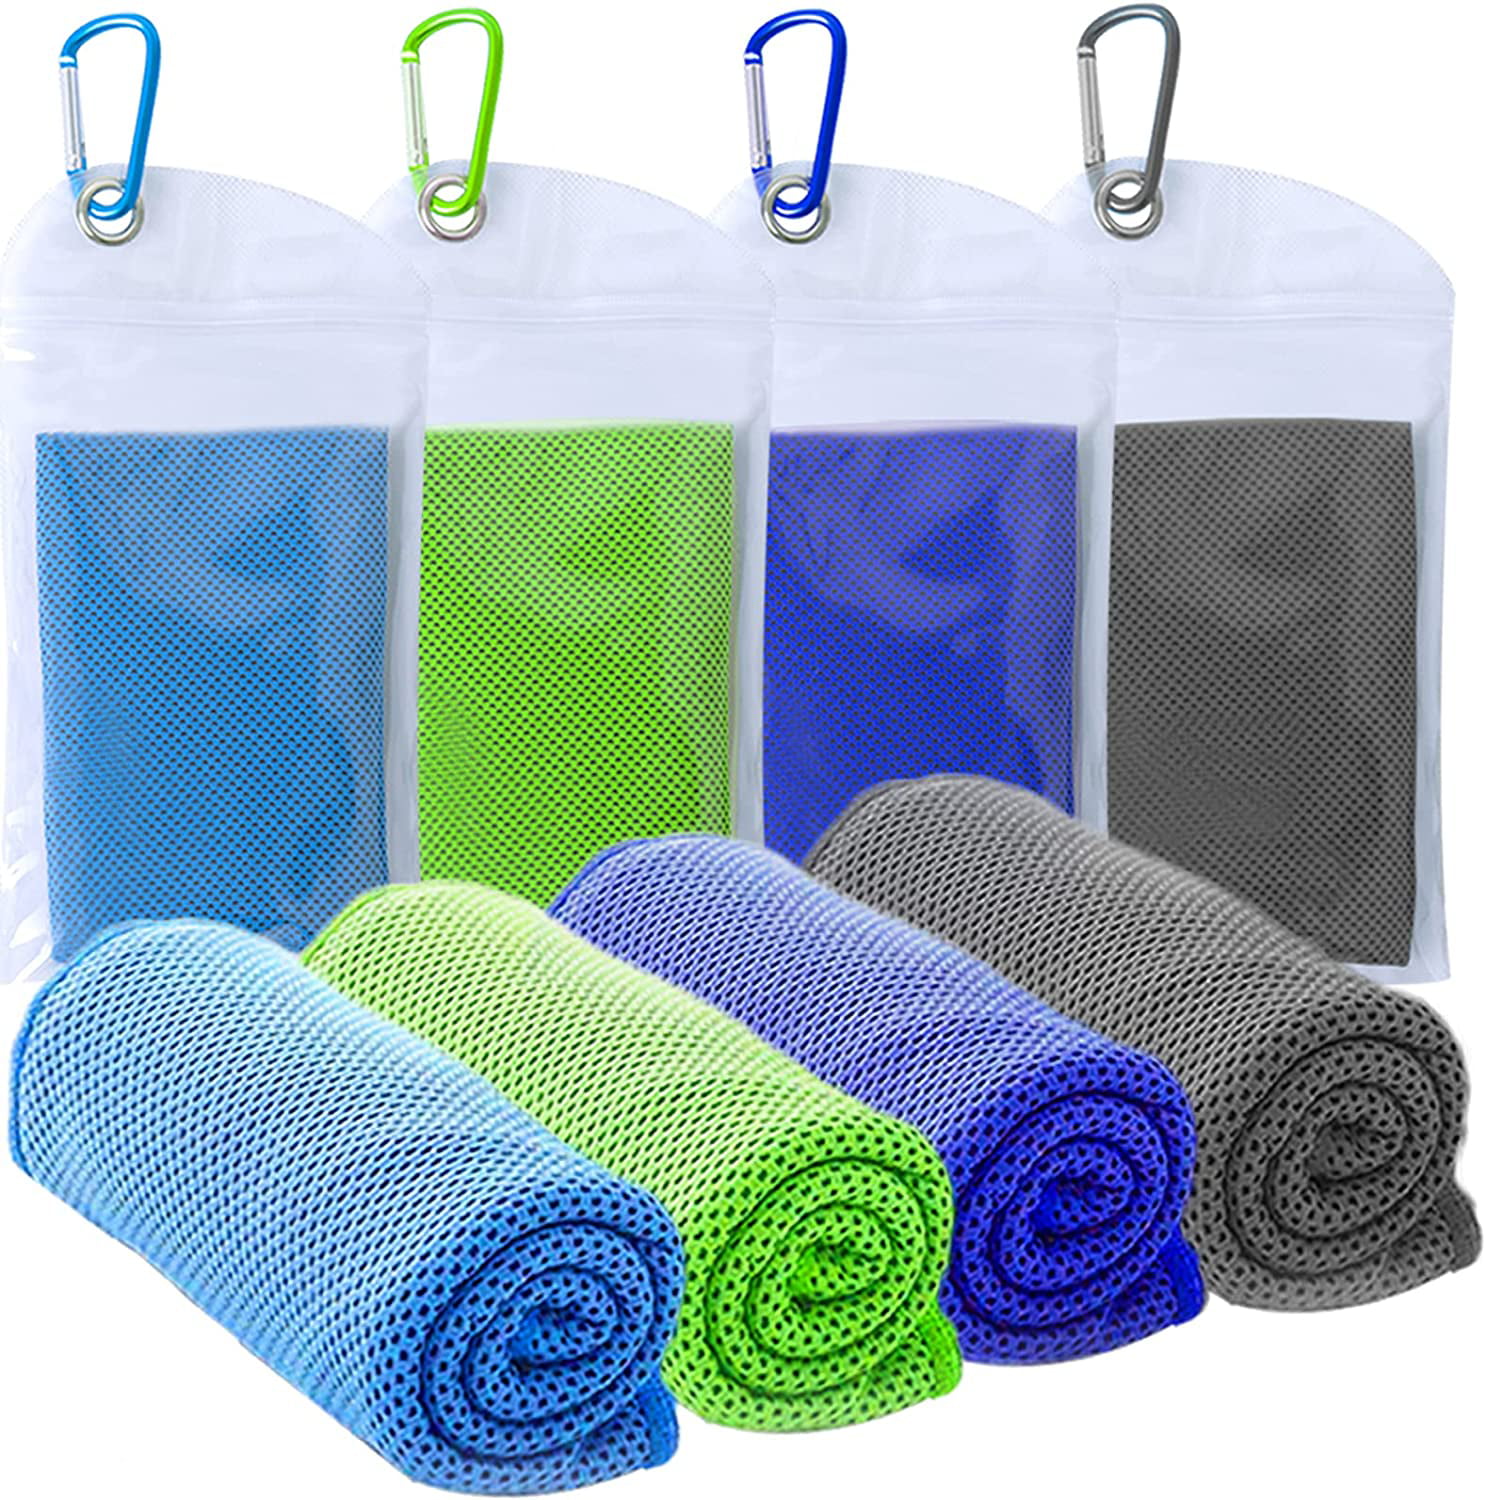 4 Pack KUEN Soft Breathable Chilly Towel & Cooling Towel 40"x12" Ice Towel 